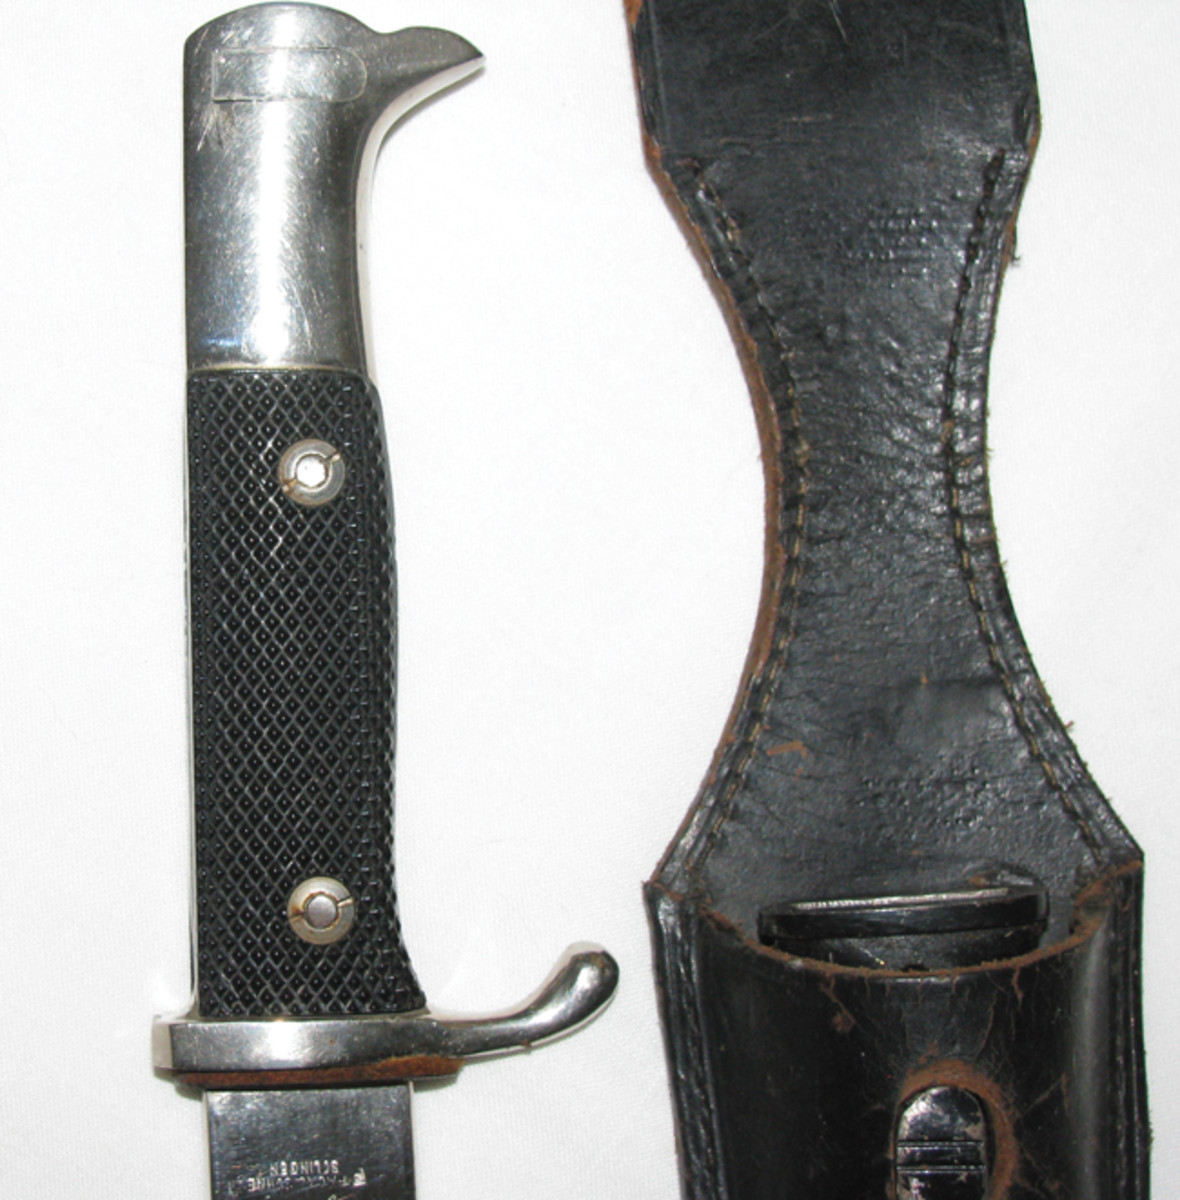  The blade maker, E. Pack & Son, sometimes used bolts and nuts on their bayonet grips rather than the usual rivets.